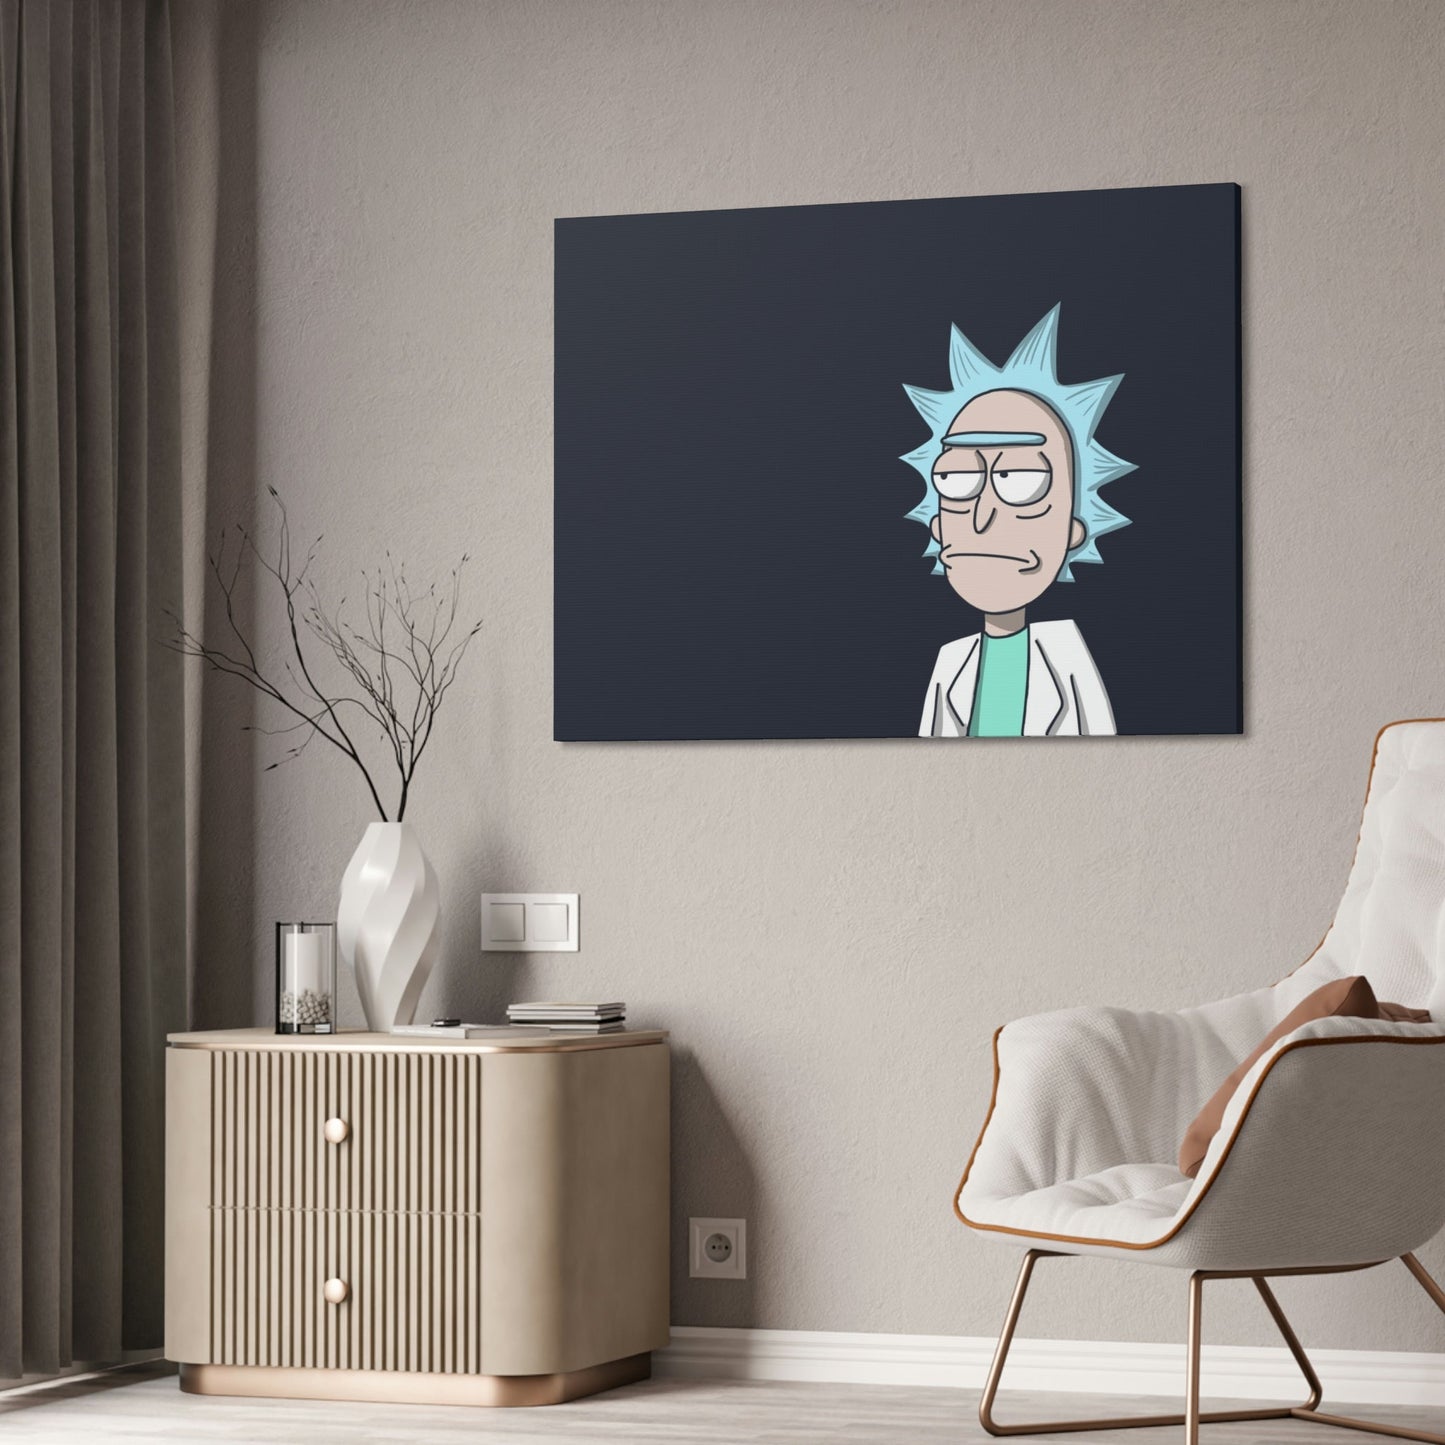 Rick's Multiverse Adventures: Framed Canvas Wall Art Depicting the Iconic Rick from Rick and Morty